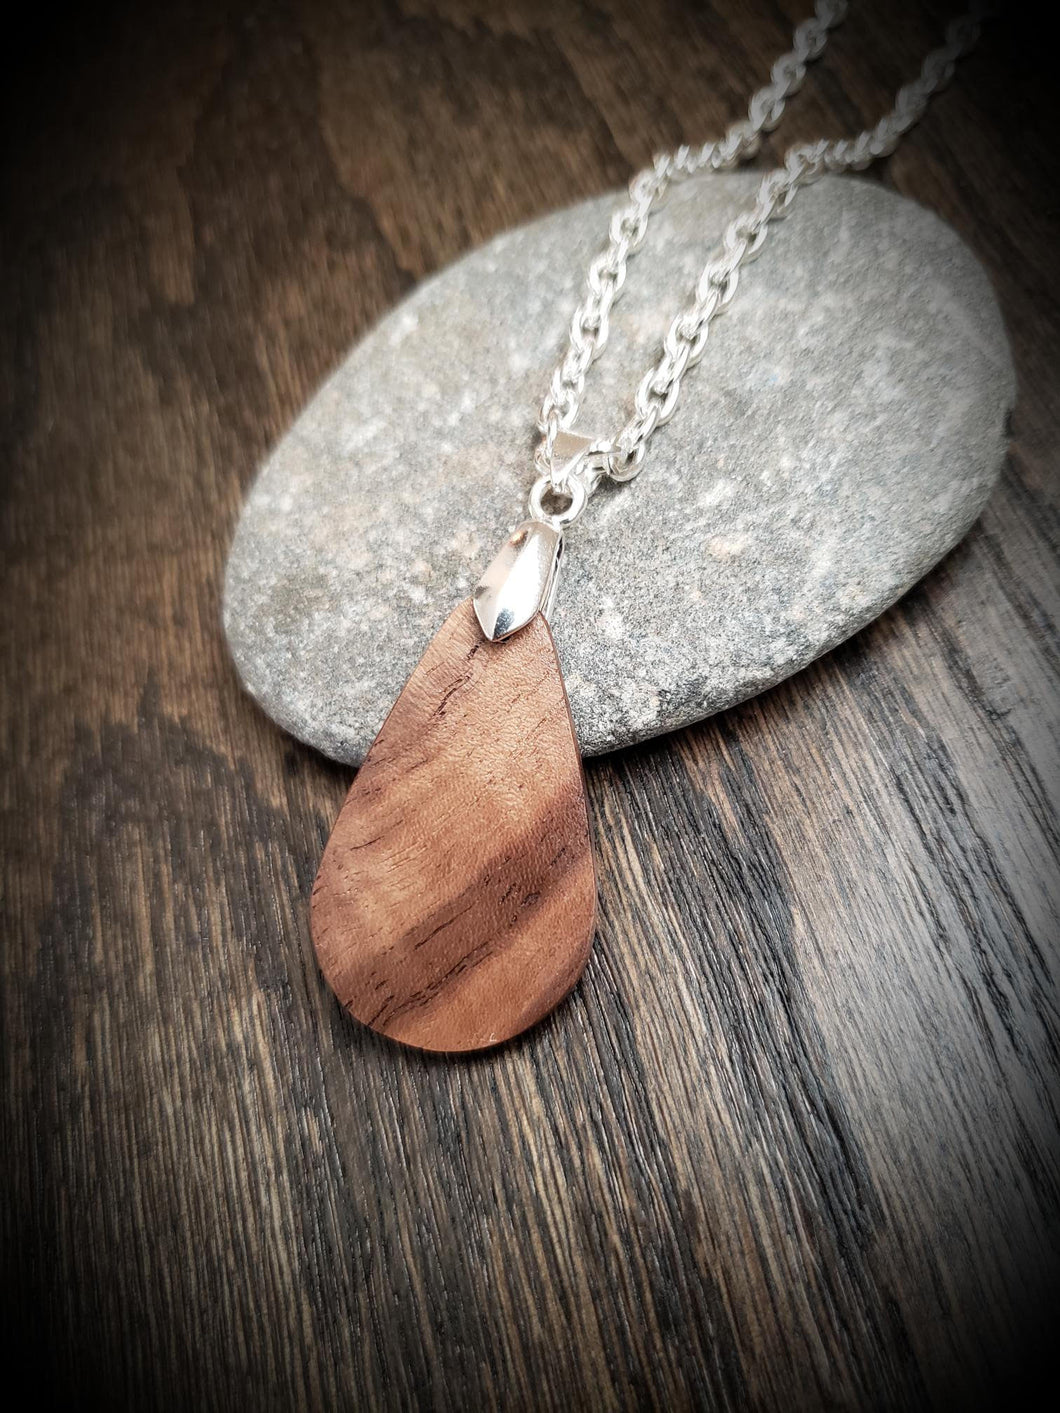 Wooden Teardrop Necklace Pendant made from Gorgeous Figured Walnut